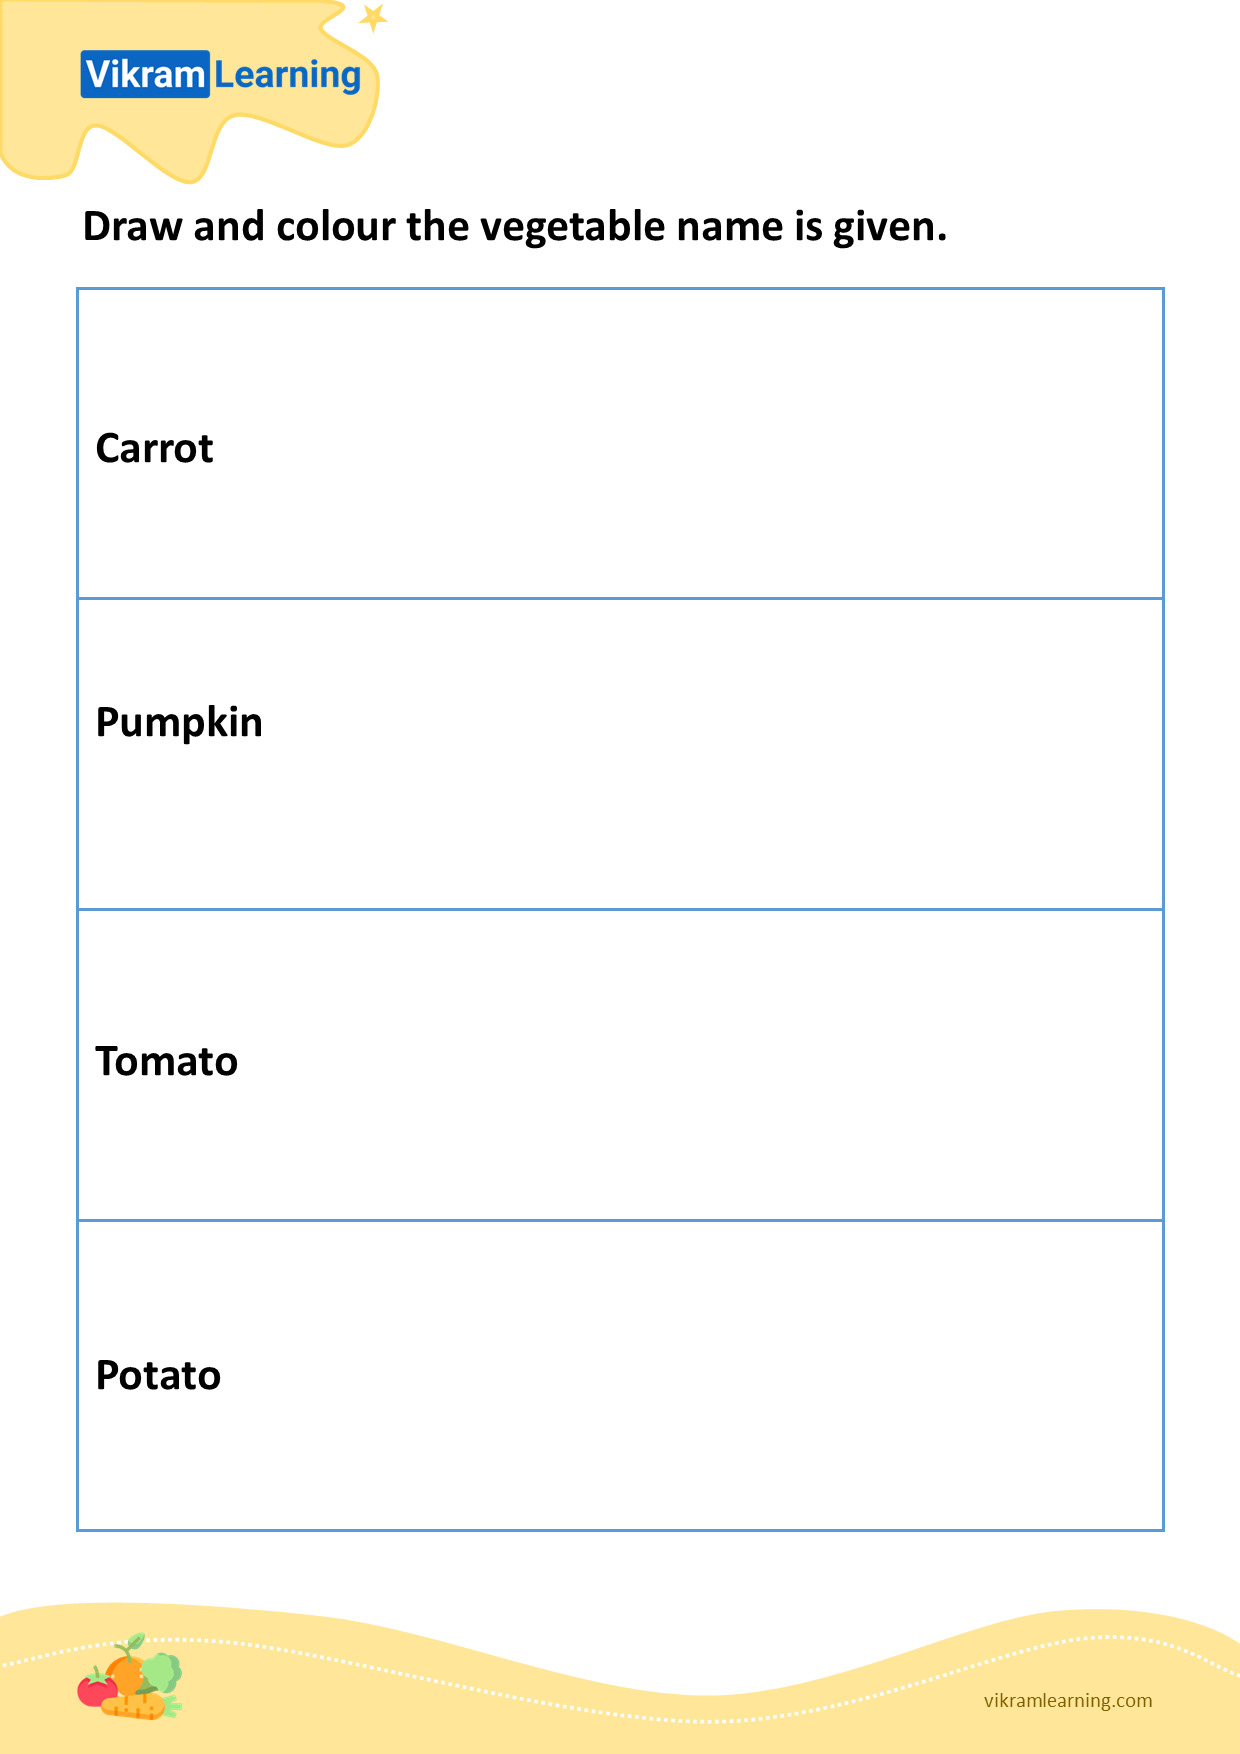 Download draw and colour the vegetable name is given worksheets